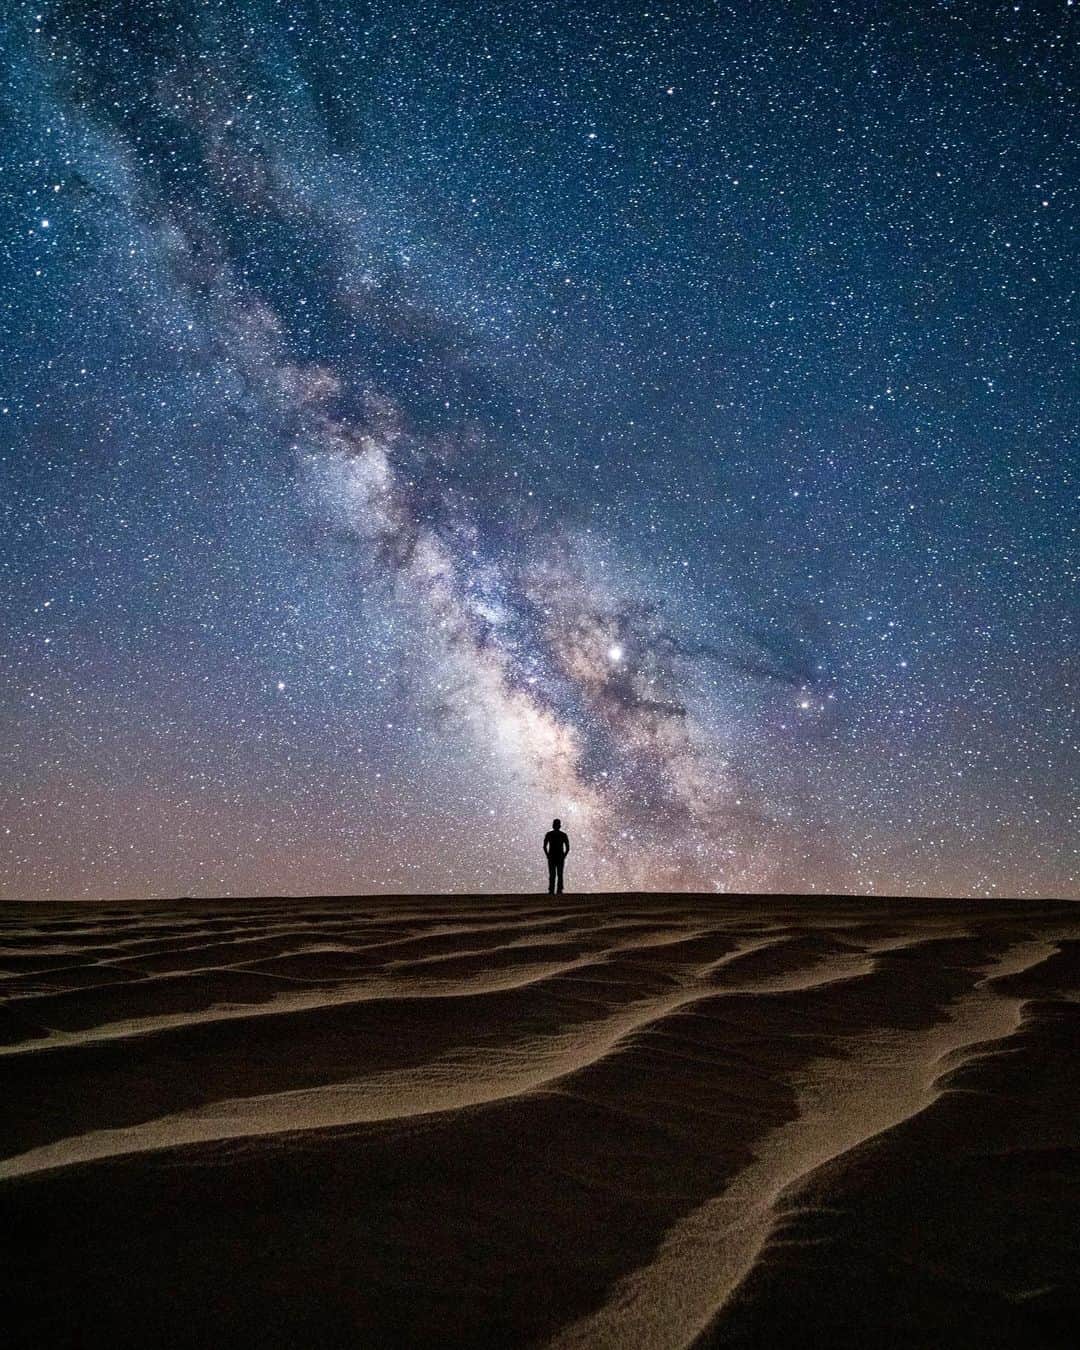 Travis Burkeのインスタグラム：「Solo night under the stars.  ⠀ This was one of those nights where I roamed through the sand dunes of Death Valley on foot for hours, constantly looking up at our galaxy and back down at the beautiful lines in the sand. A massive windstorm had swept through earlier that day, removing any trace of human presence. ⠀ Camera Settings-  ⠀ Focal Length: 14mm Shutter speed: 25 seconds Aperture: f/ 2.8 ISO: 8000 Lighting: I set up a very faint light off to the side to help illuminate the lines in the sand the way my eyes could see them from the glow of the stars.    I love pushing the limits of my gear, my imagination, and my body, all of which are usually more capable than I give credit 😂. Fun night exploring until the earth rotated back into view of our closest star!  ⠀ Check out my Stories right now to see a series of images where I share all of my camera settings and some tips! Let me know which ones were helpful to you. ⠀ #nightphotography #camerasettings #deathvalley #milkyway」